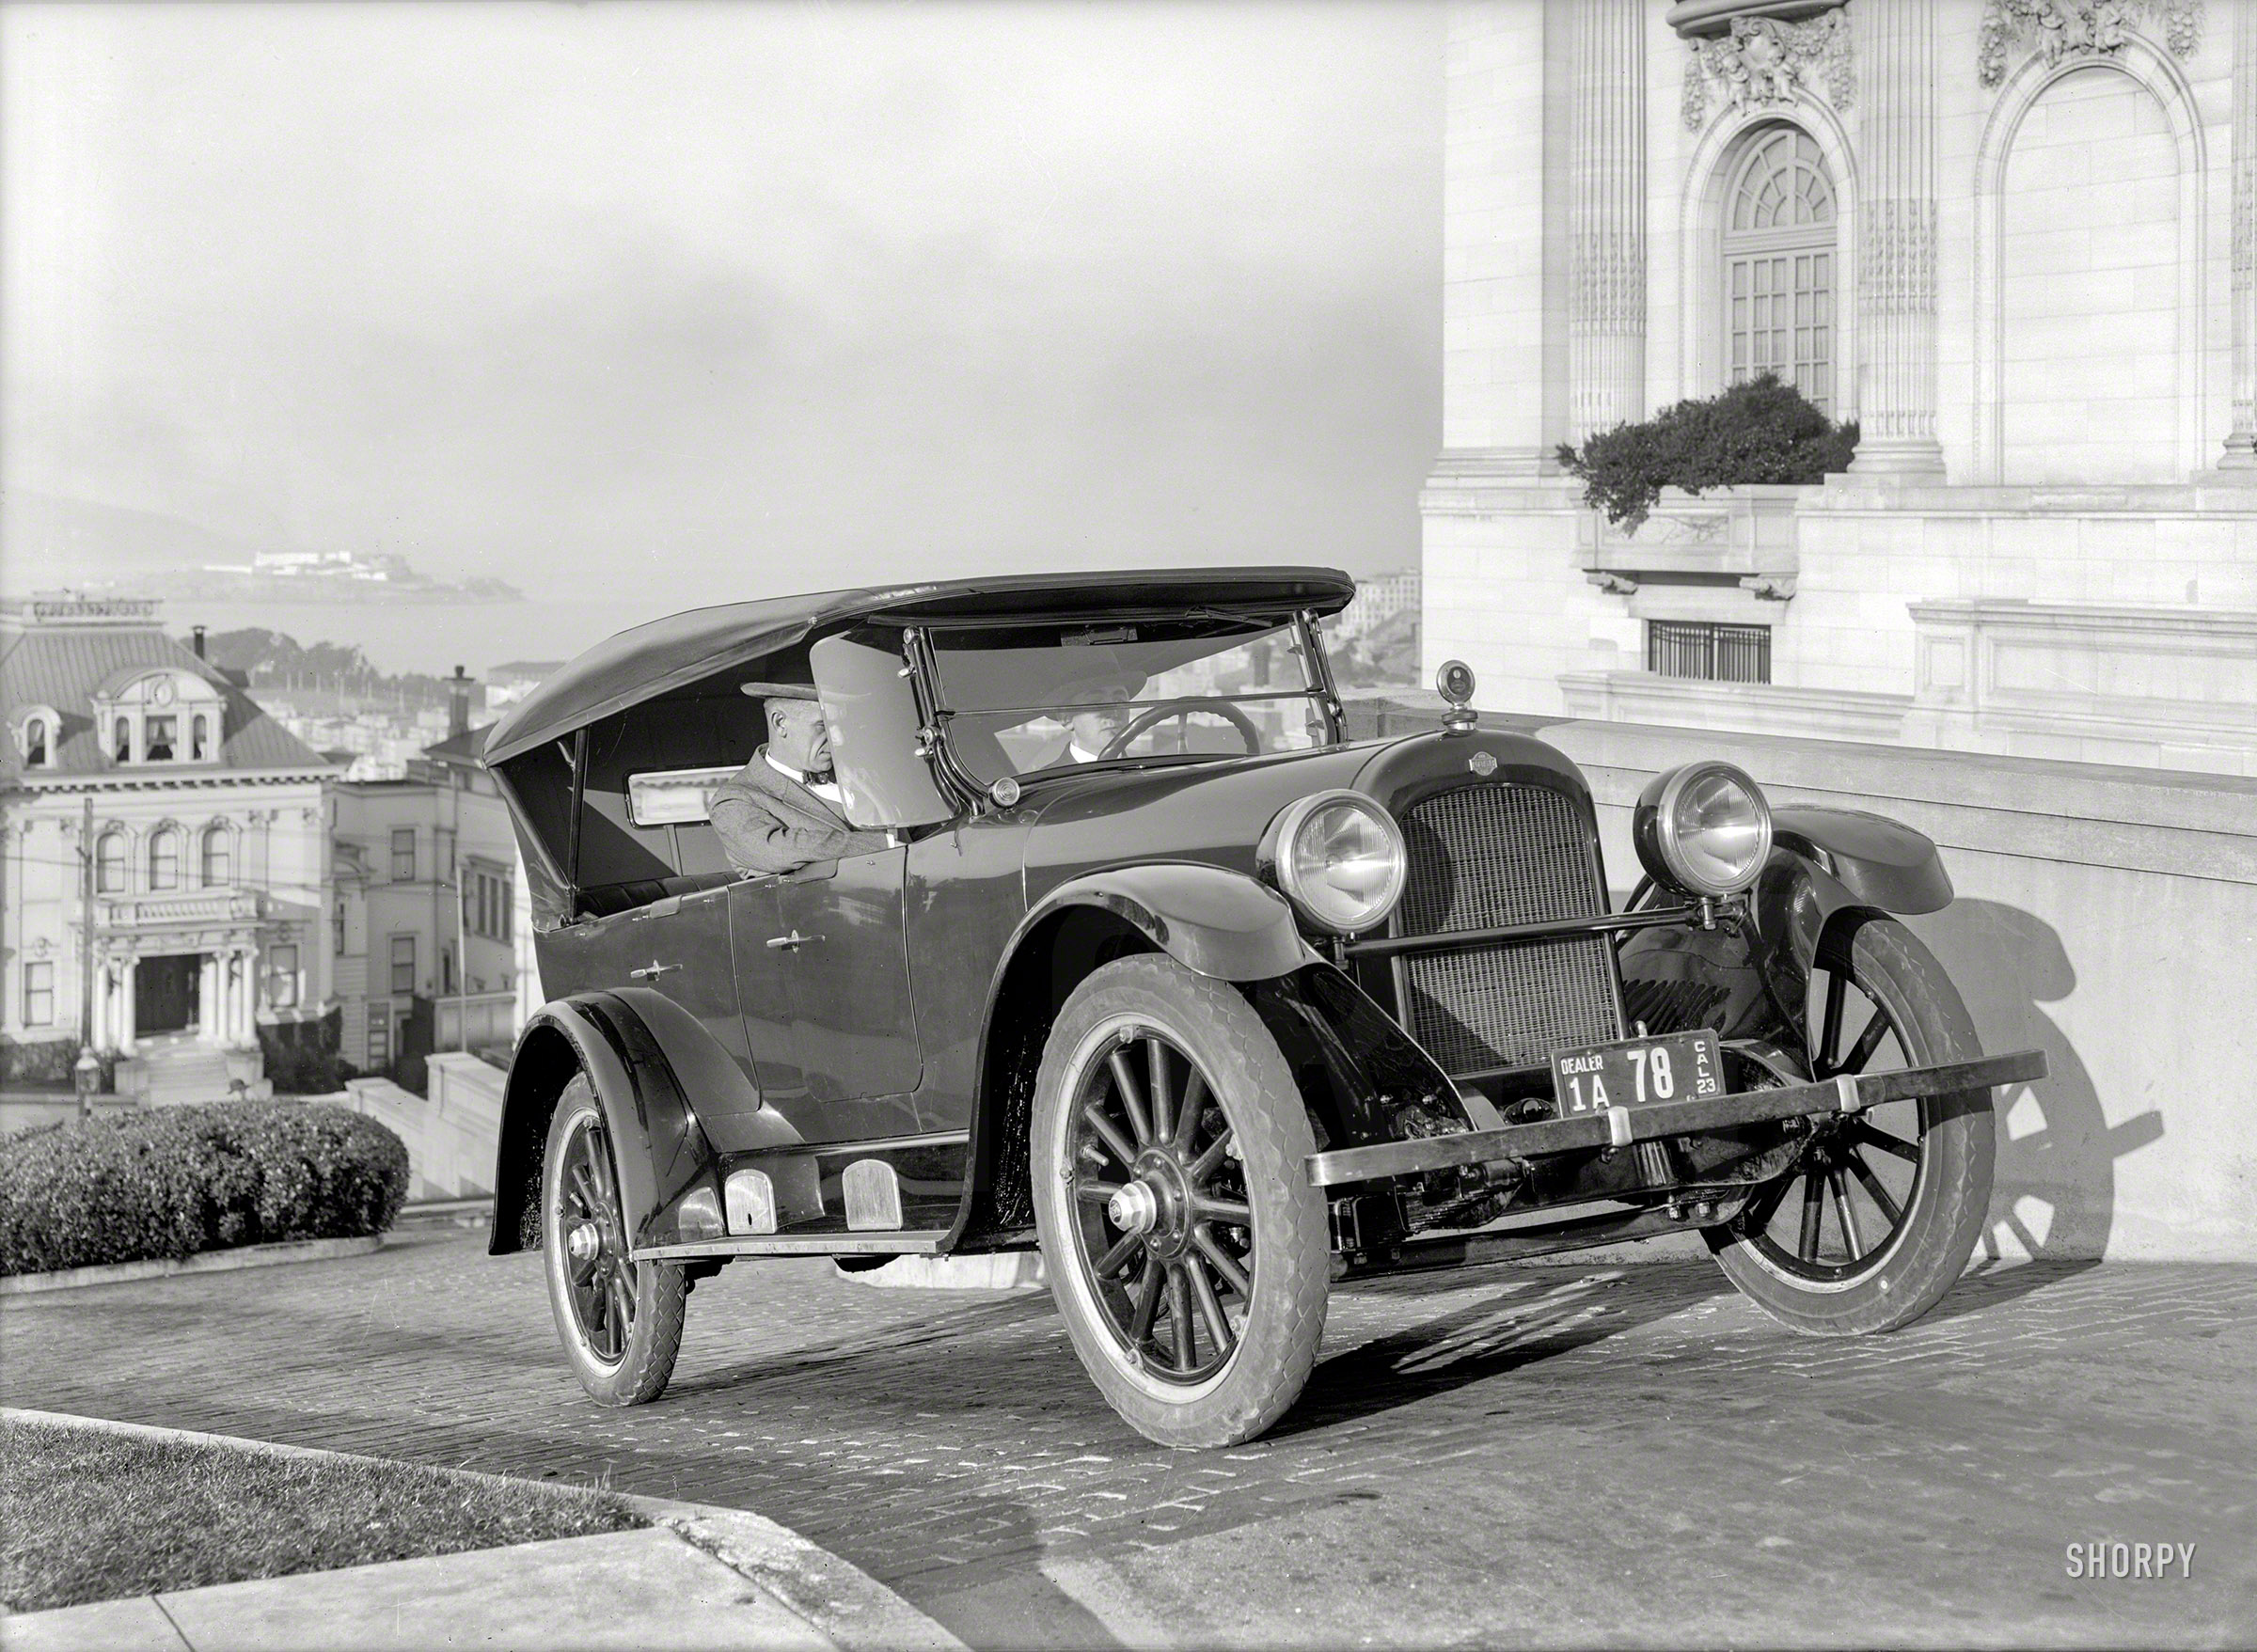 San Francisco, 1923. "Nash sedan at Spreckels Mansion." With Alcatraz in the distance. 5x7 glass negative by Christopher Helin. View full size.